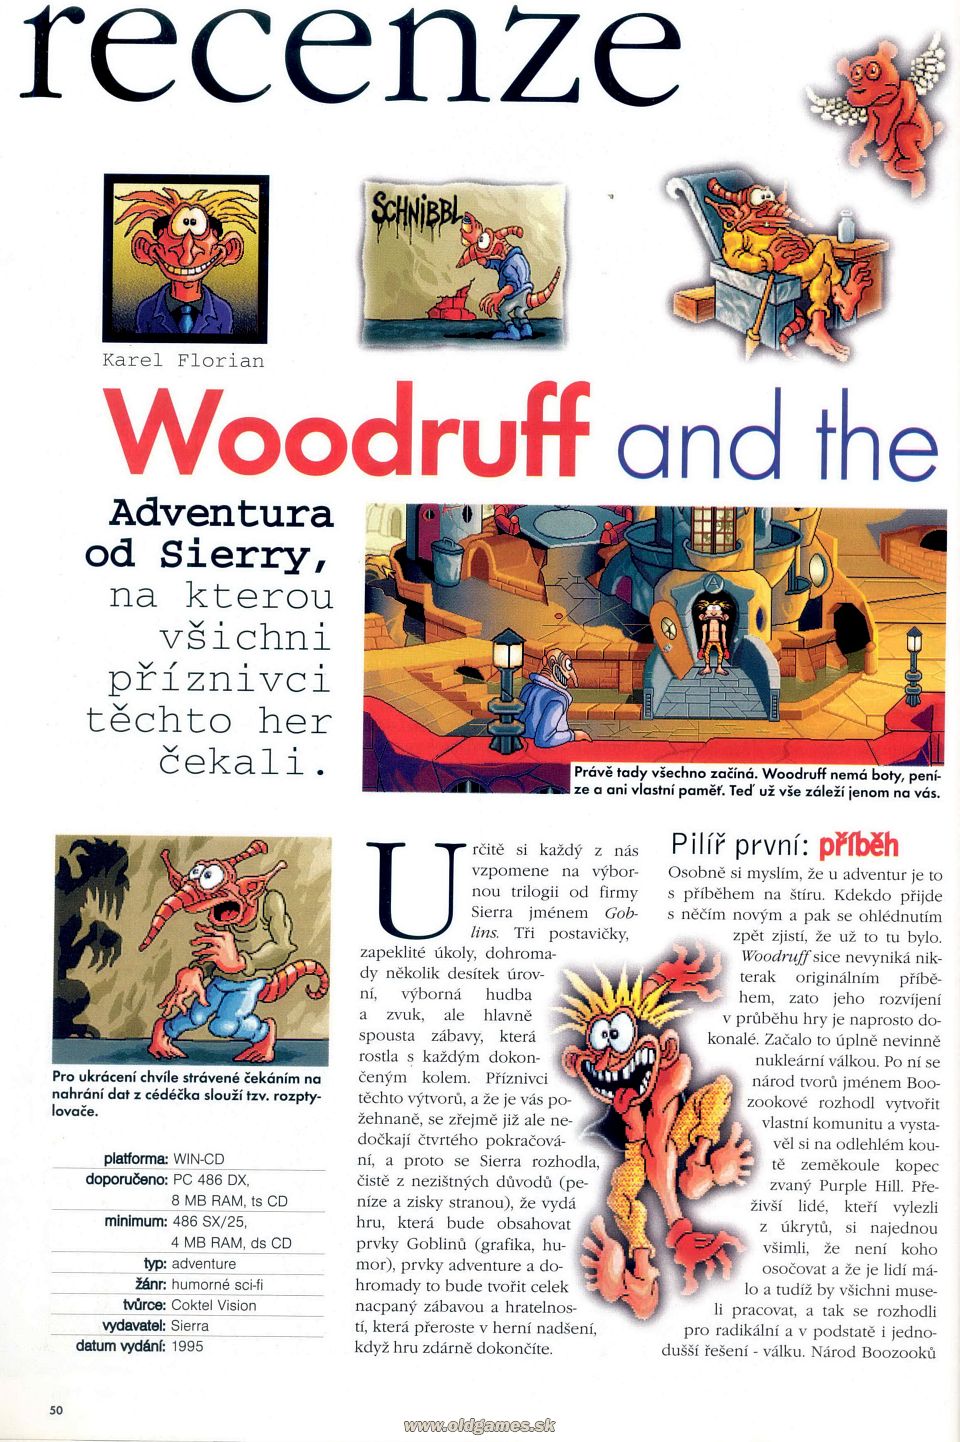 Woodruff and the Schnibble of Azimuth